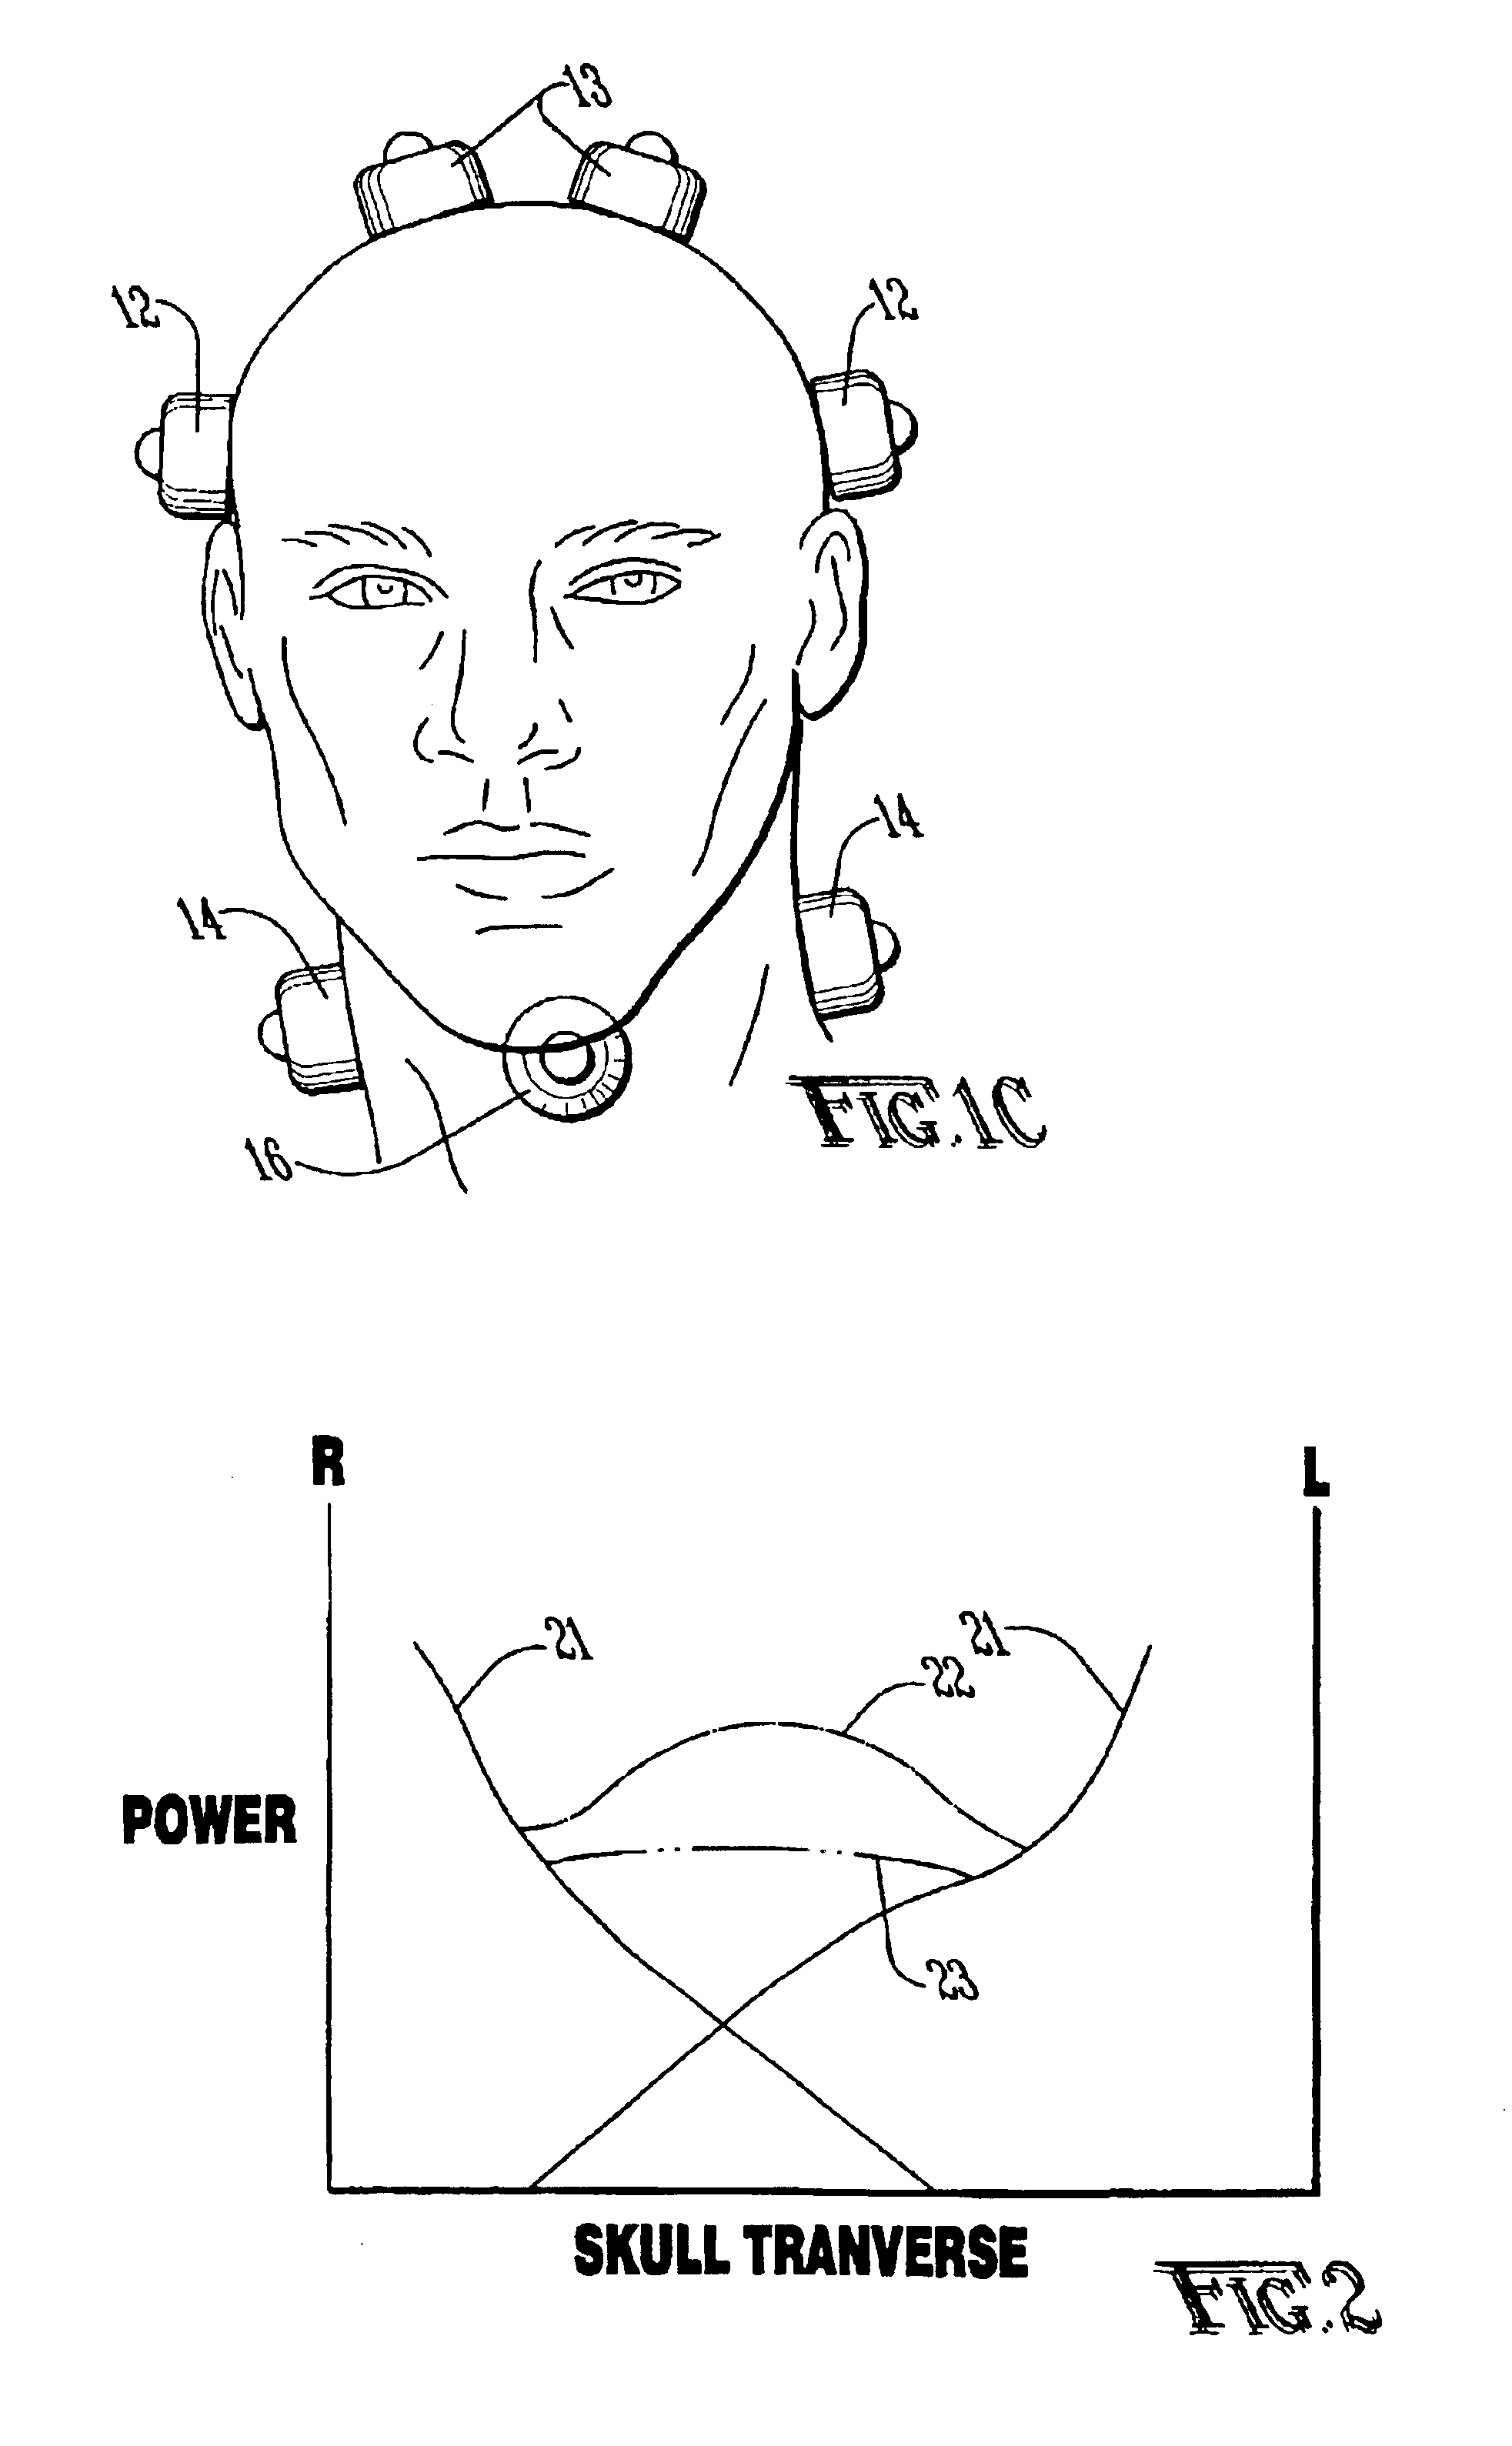 Ultrasound apparatus and method for augmented clot lysis